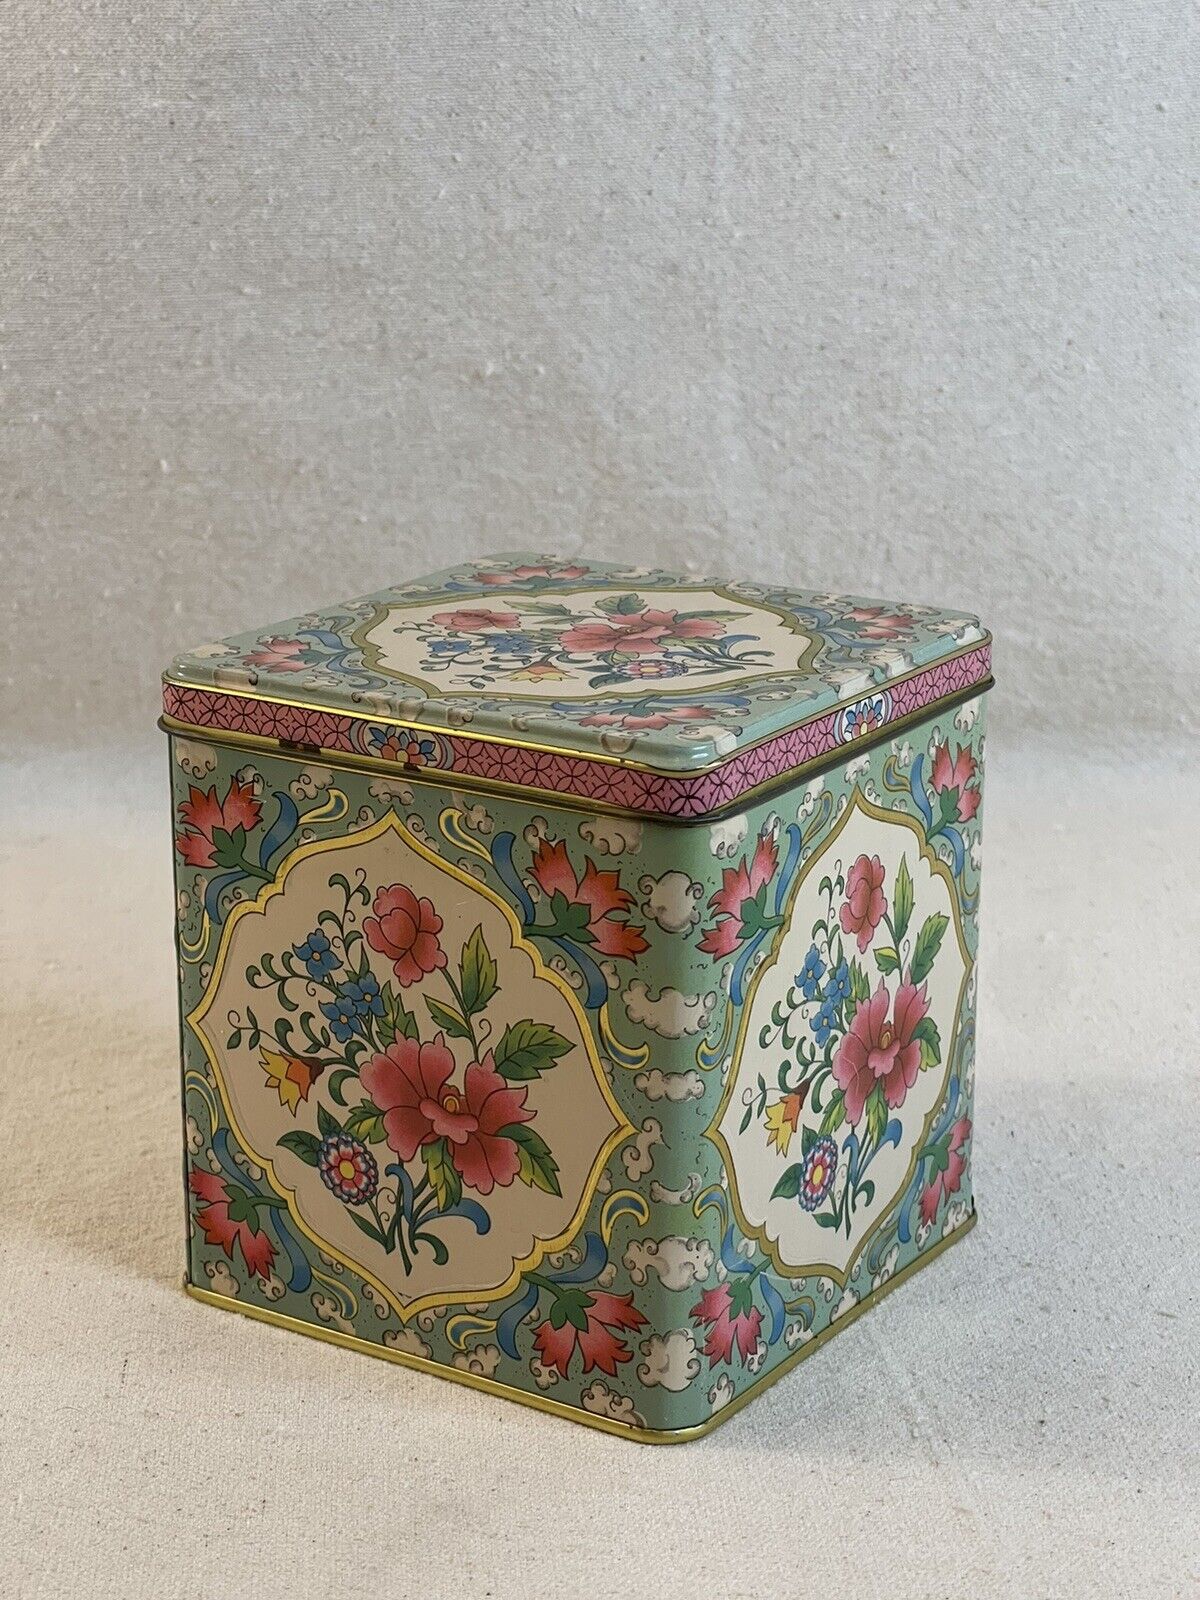 Vintage Tin by DAHER Long Island, N.Y. Made in England Hinged Lid Pink Florals